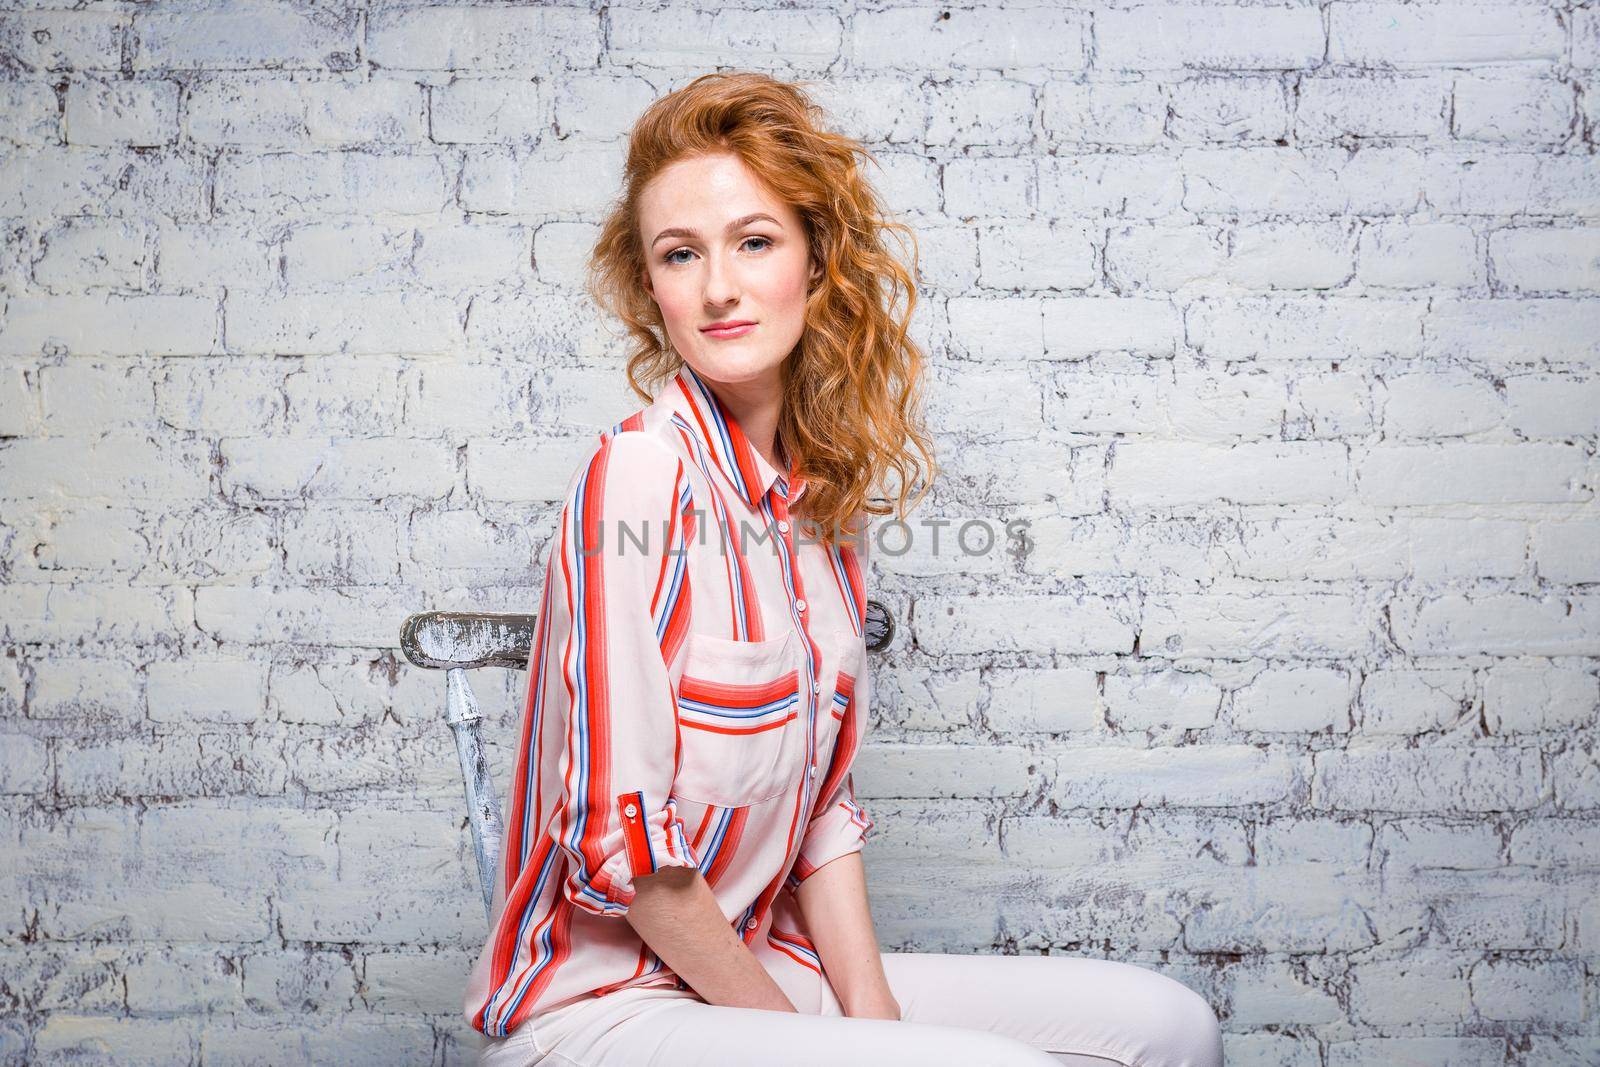 portrait Beautiful young woman student with red curly hair and freckles on her face sitting on a wooden chair on a brick wall background in gray. Dressed in a red striped shirt by Tomashevska